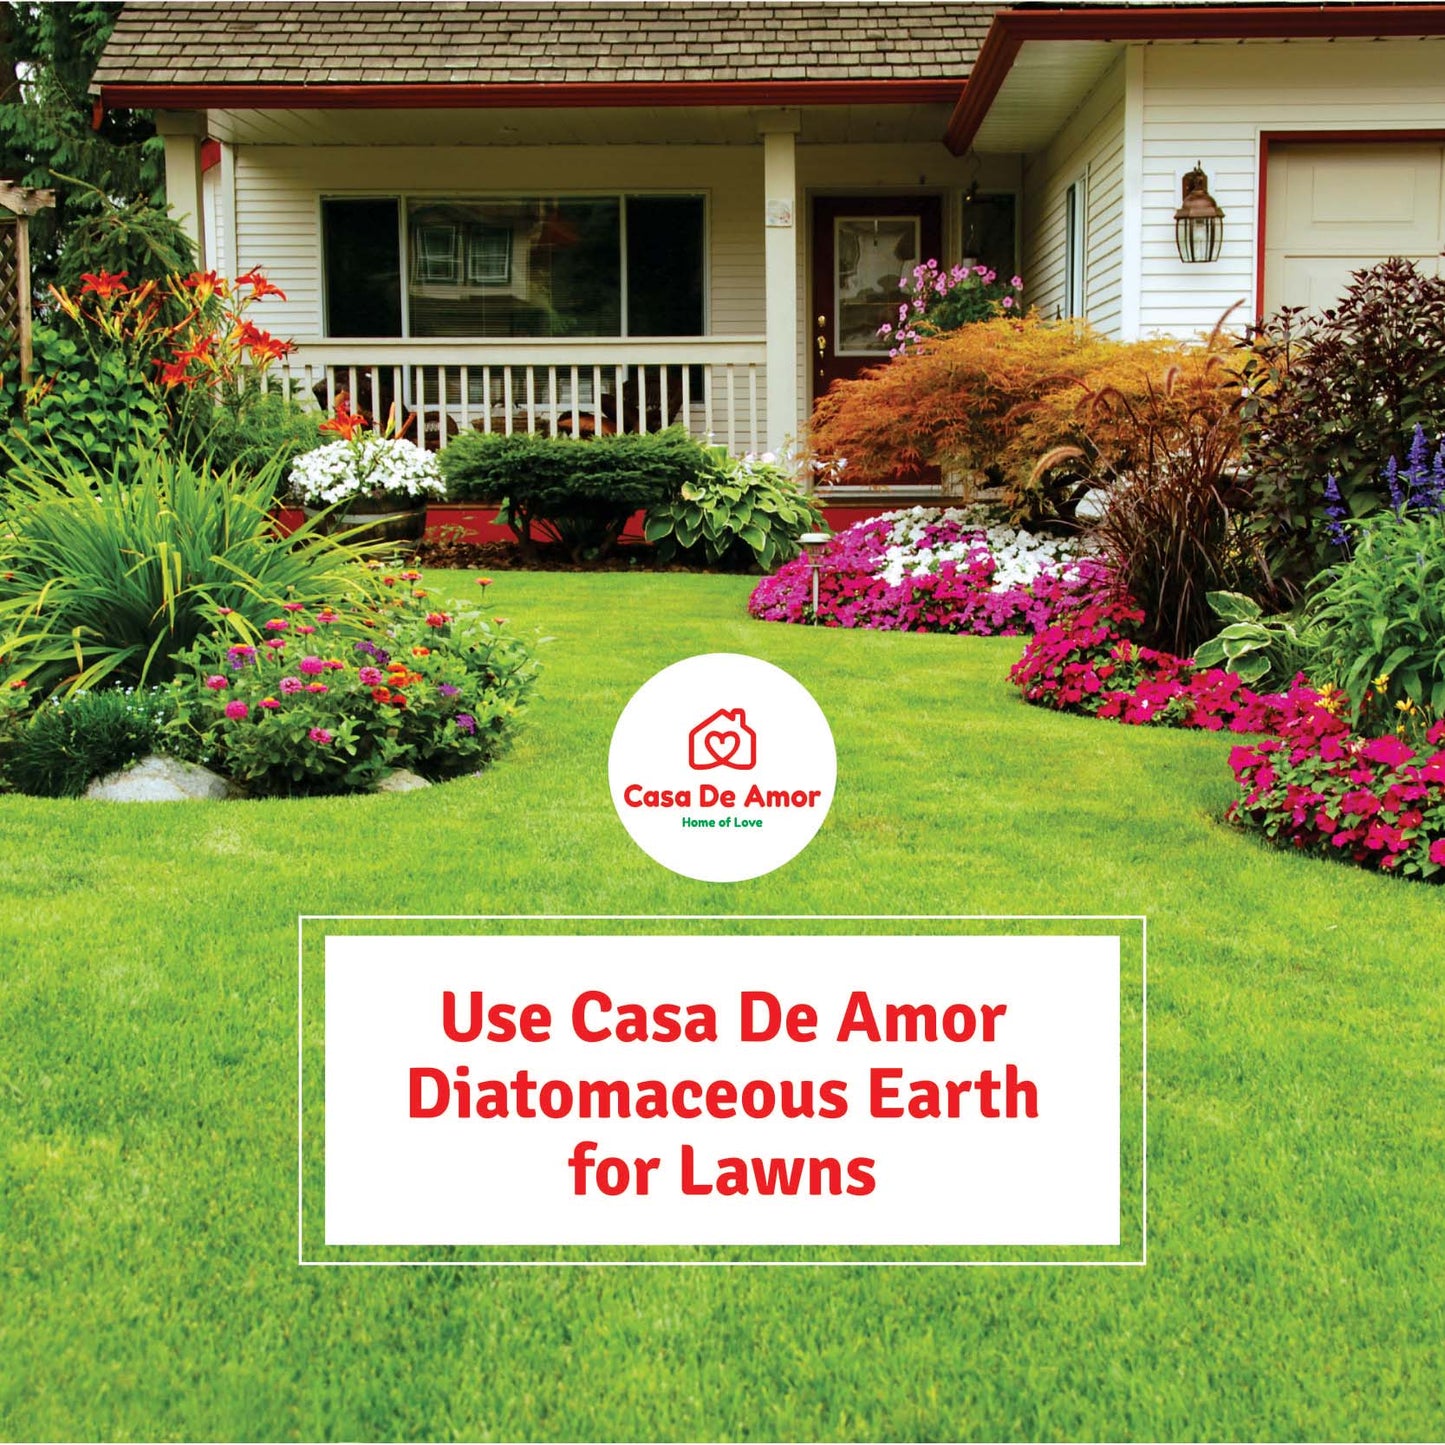 Diatomaceous Earth for lawns